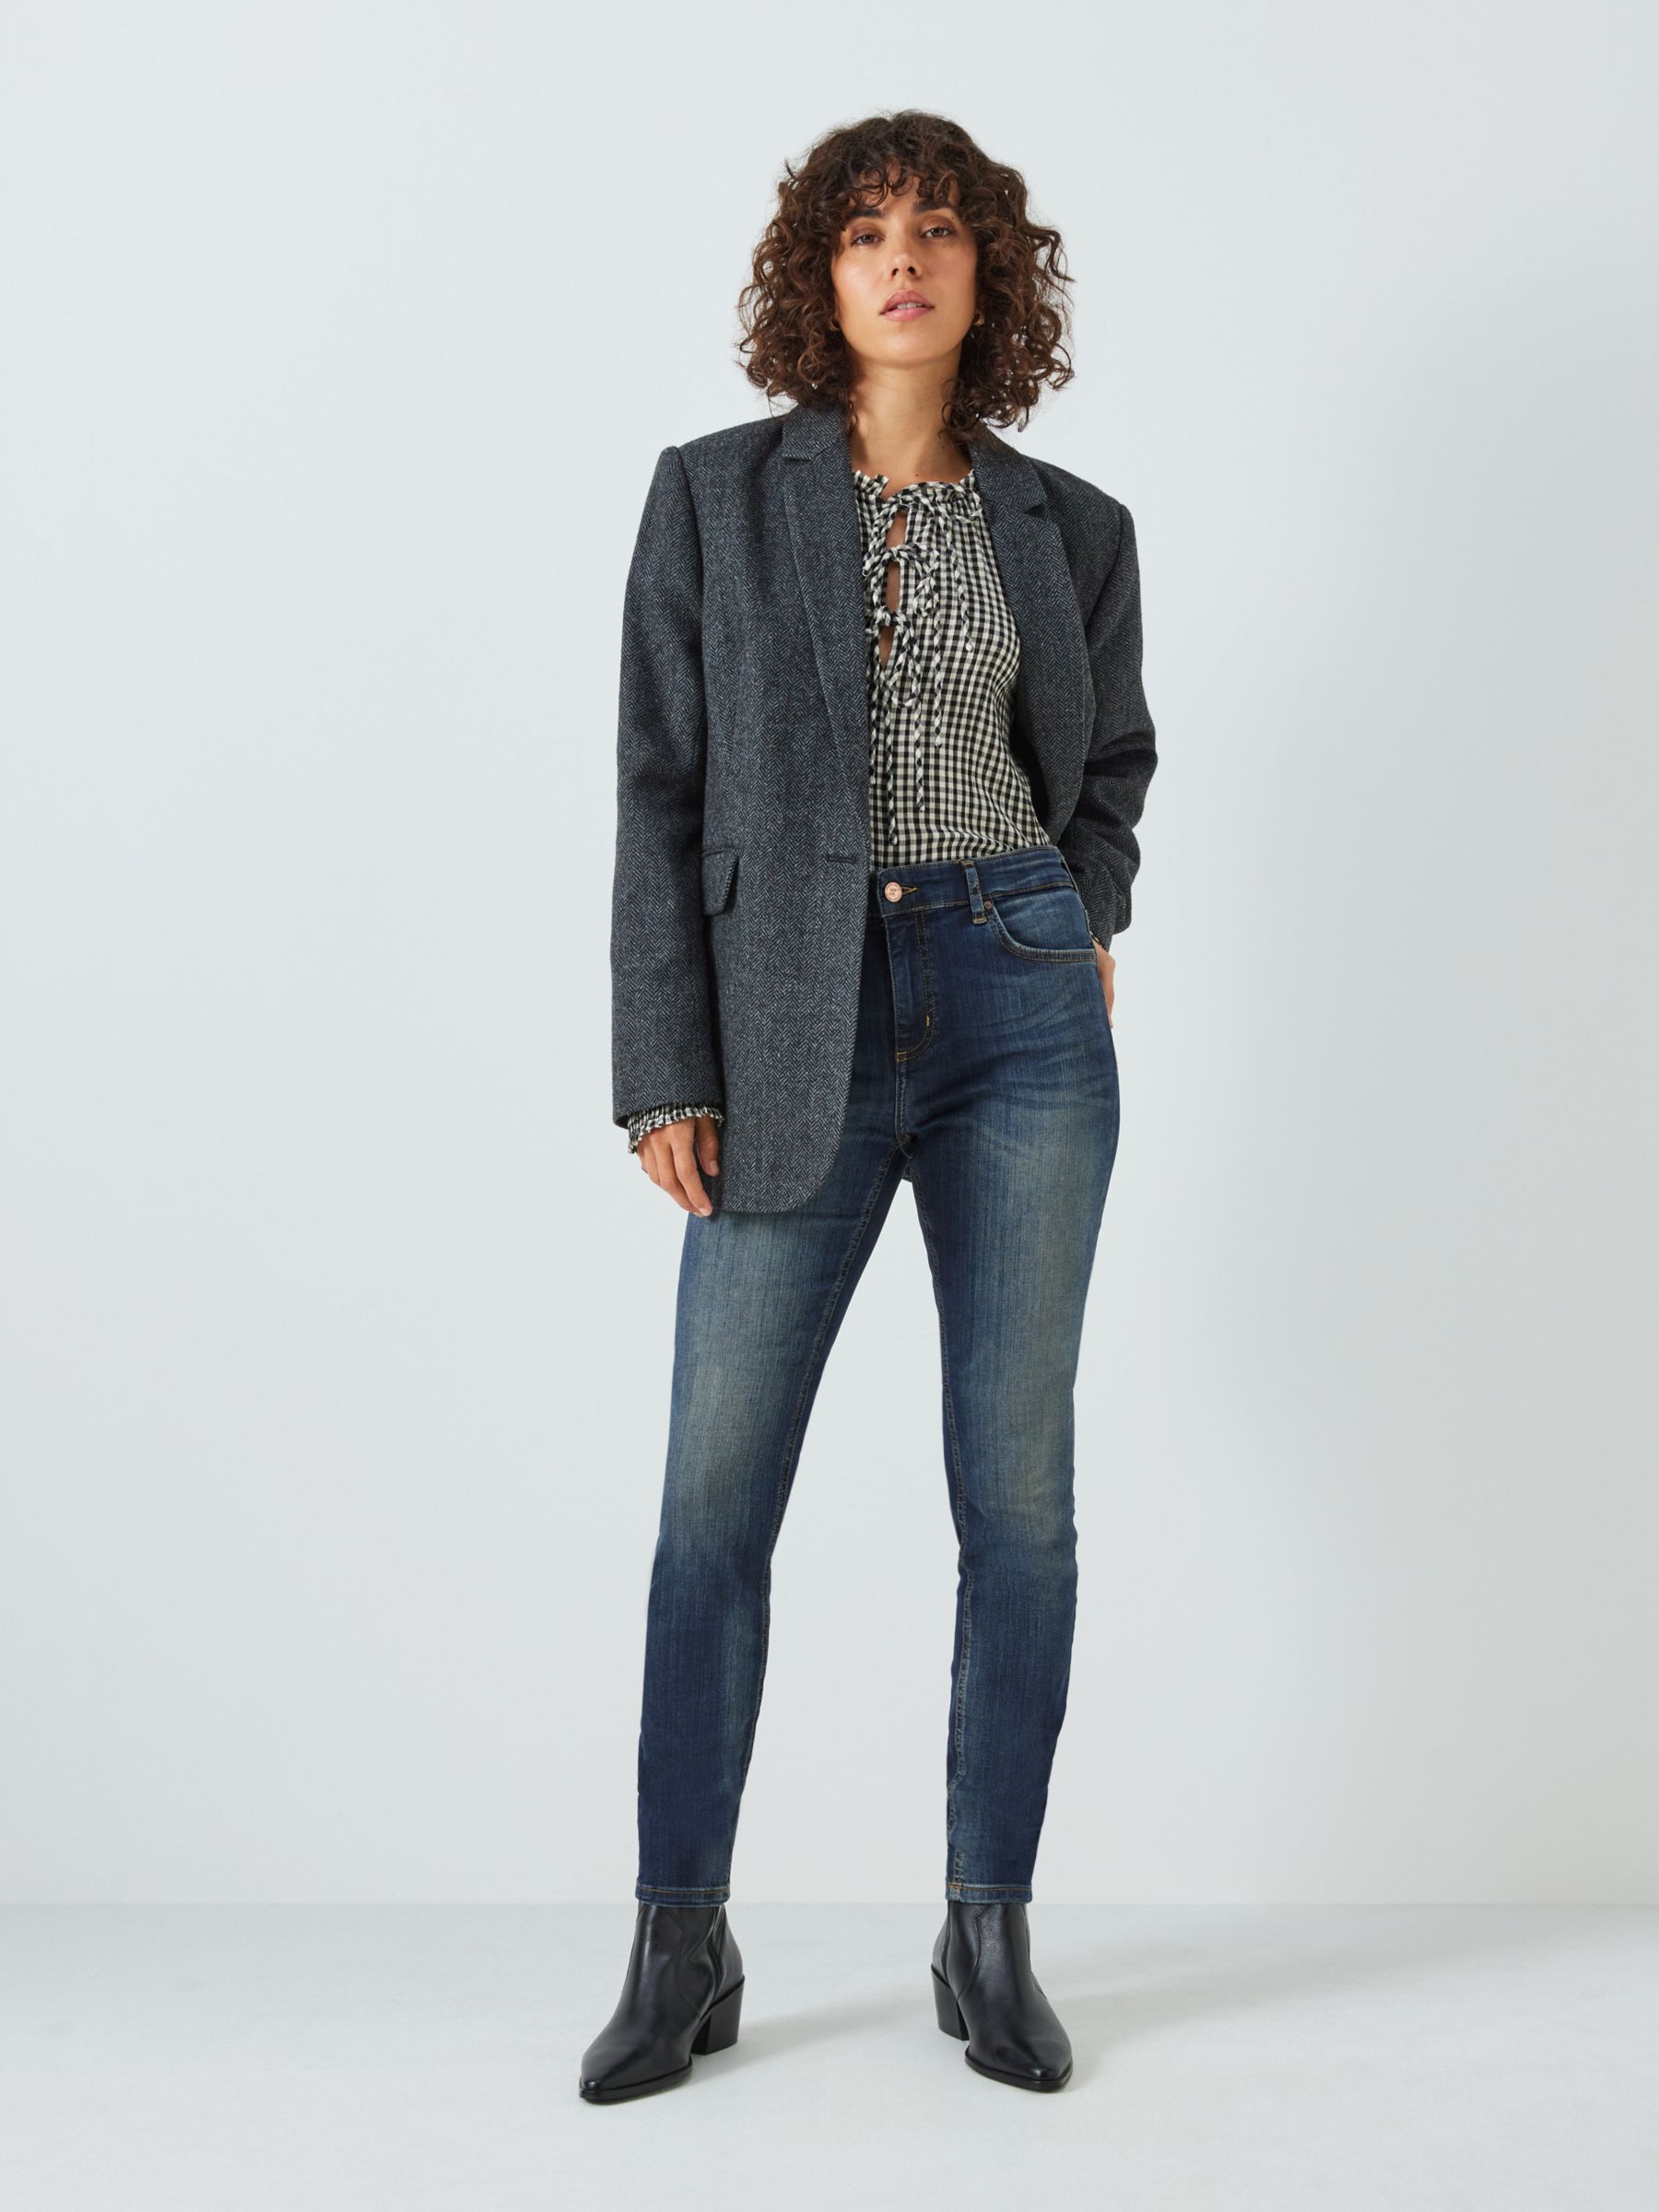 AND/OR Abbot Kinney Skinny Jeans, Deja Blue at John Lewis & Partners